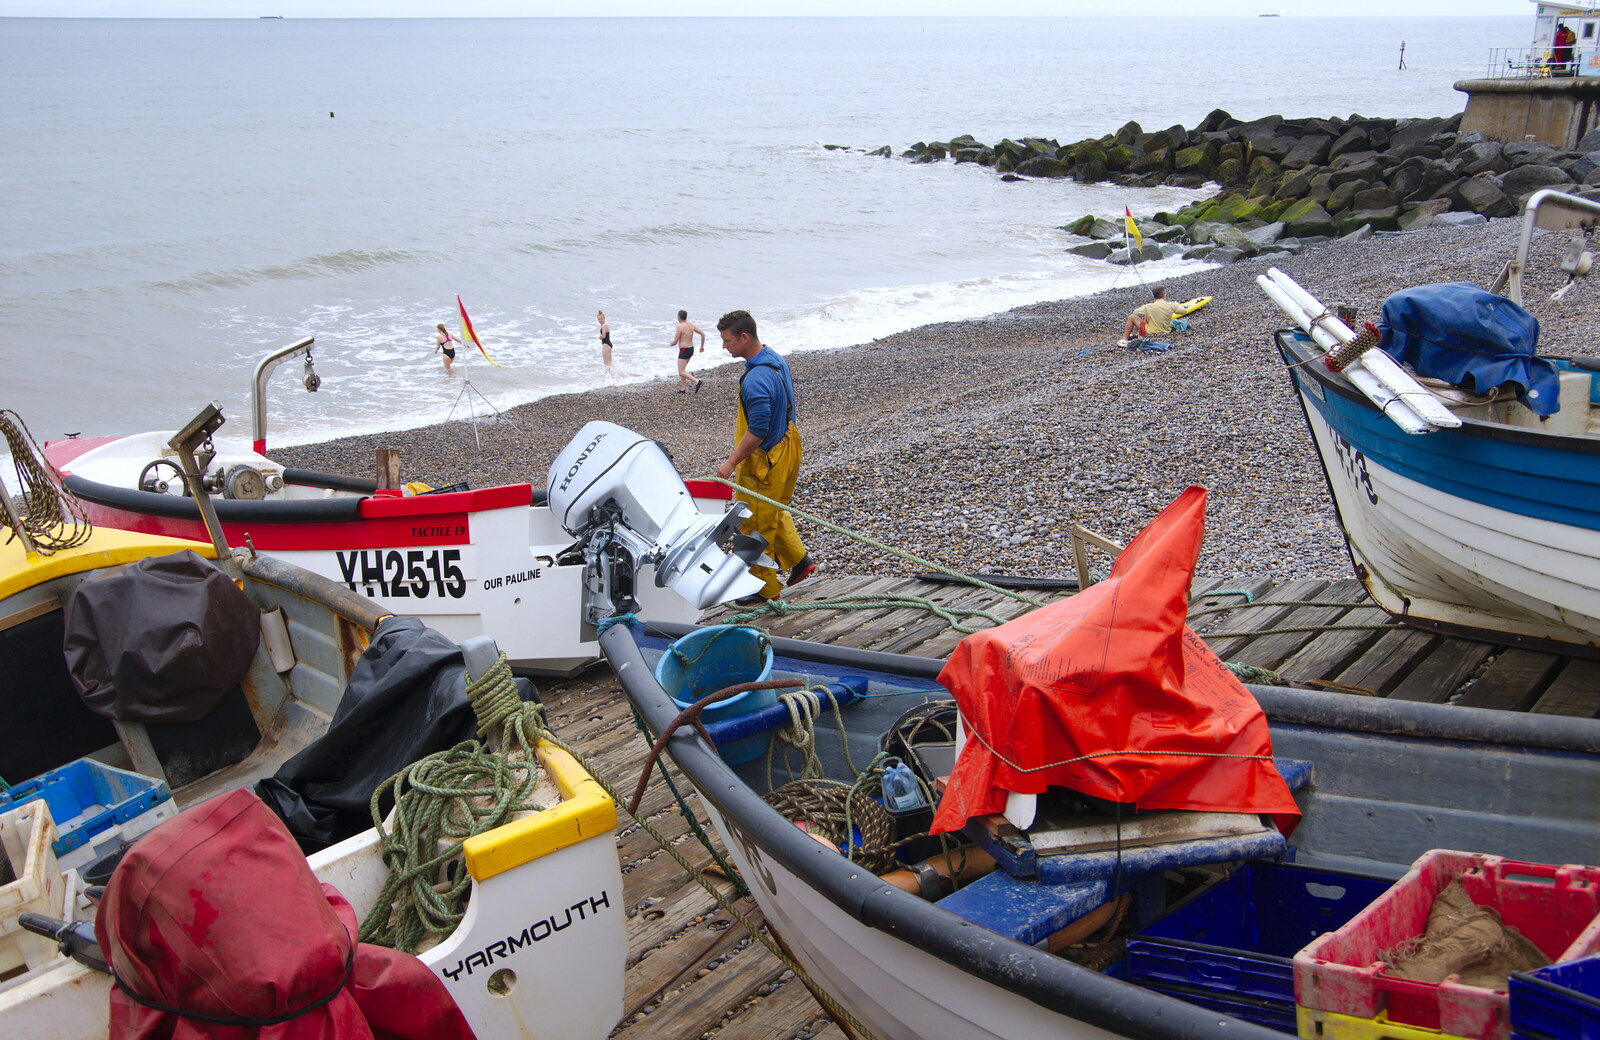 Fishing boats on the beach from Kelling Camping and the Potty Morris Festival, Sheringham, North Norfolk - 6th July 2019